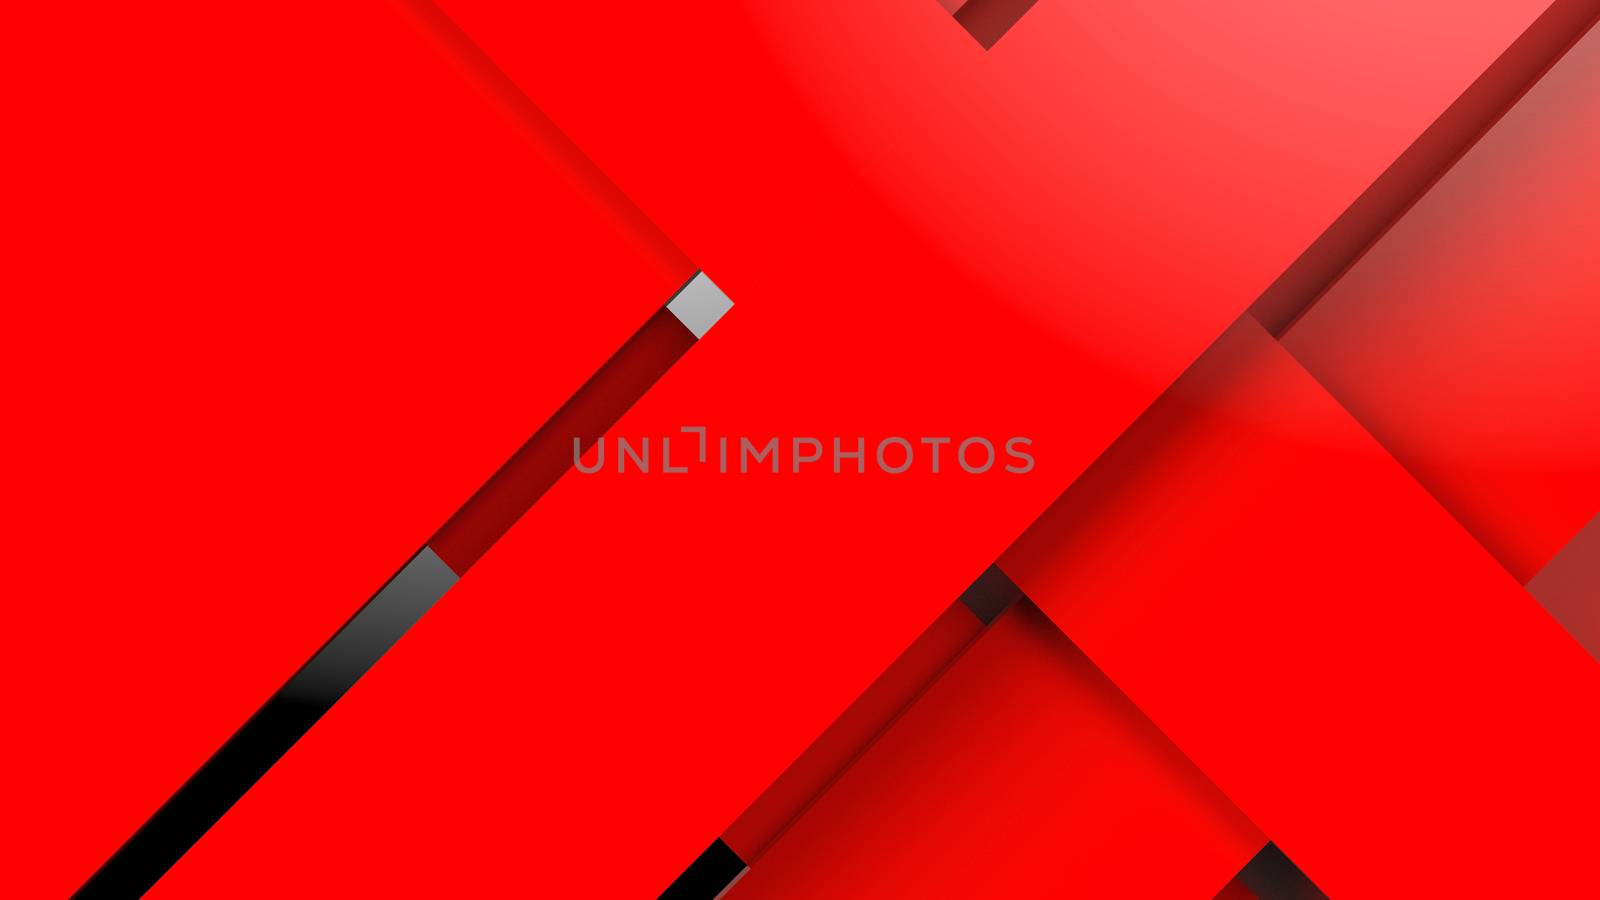 Diagonal red dynamic stripes on color background. Modern abstract 3d render background with lines and dark shadows